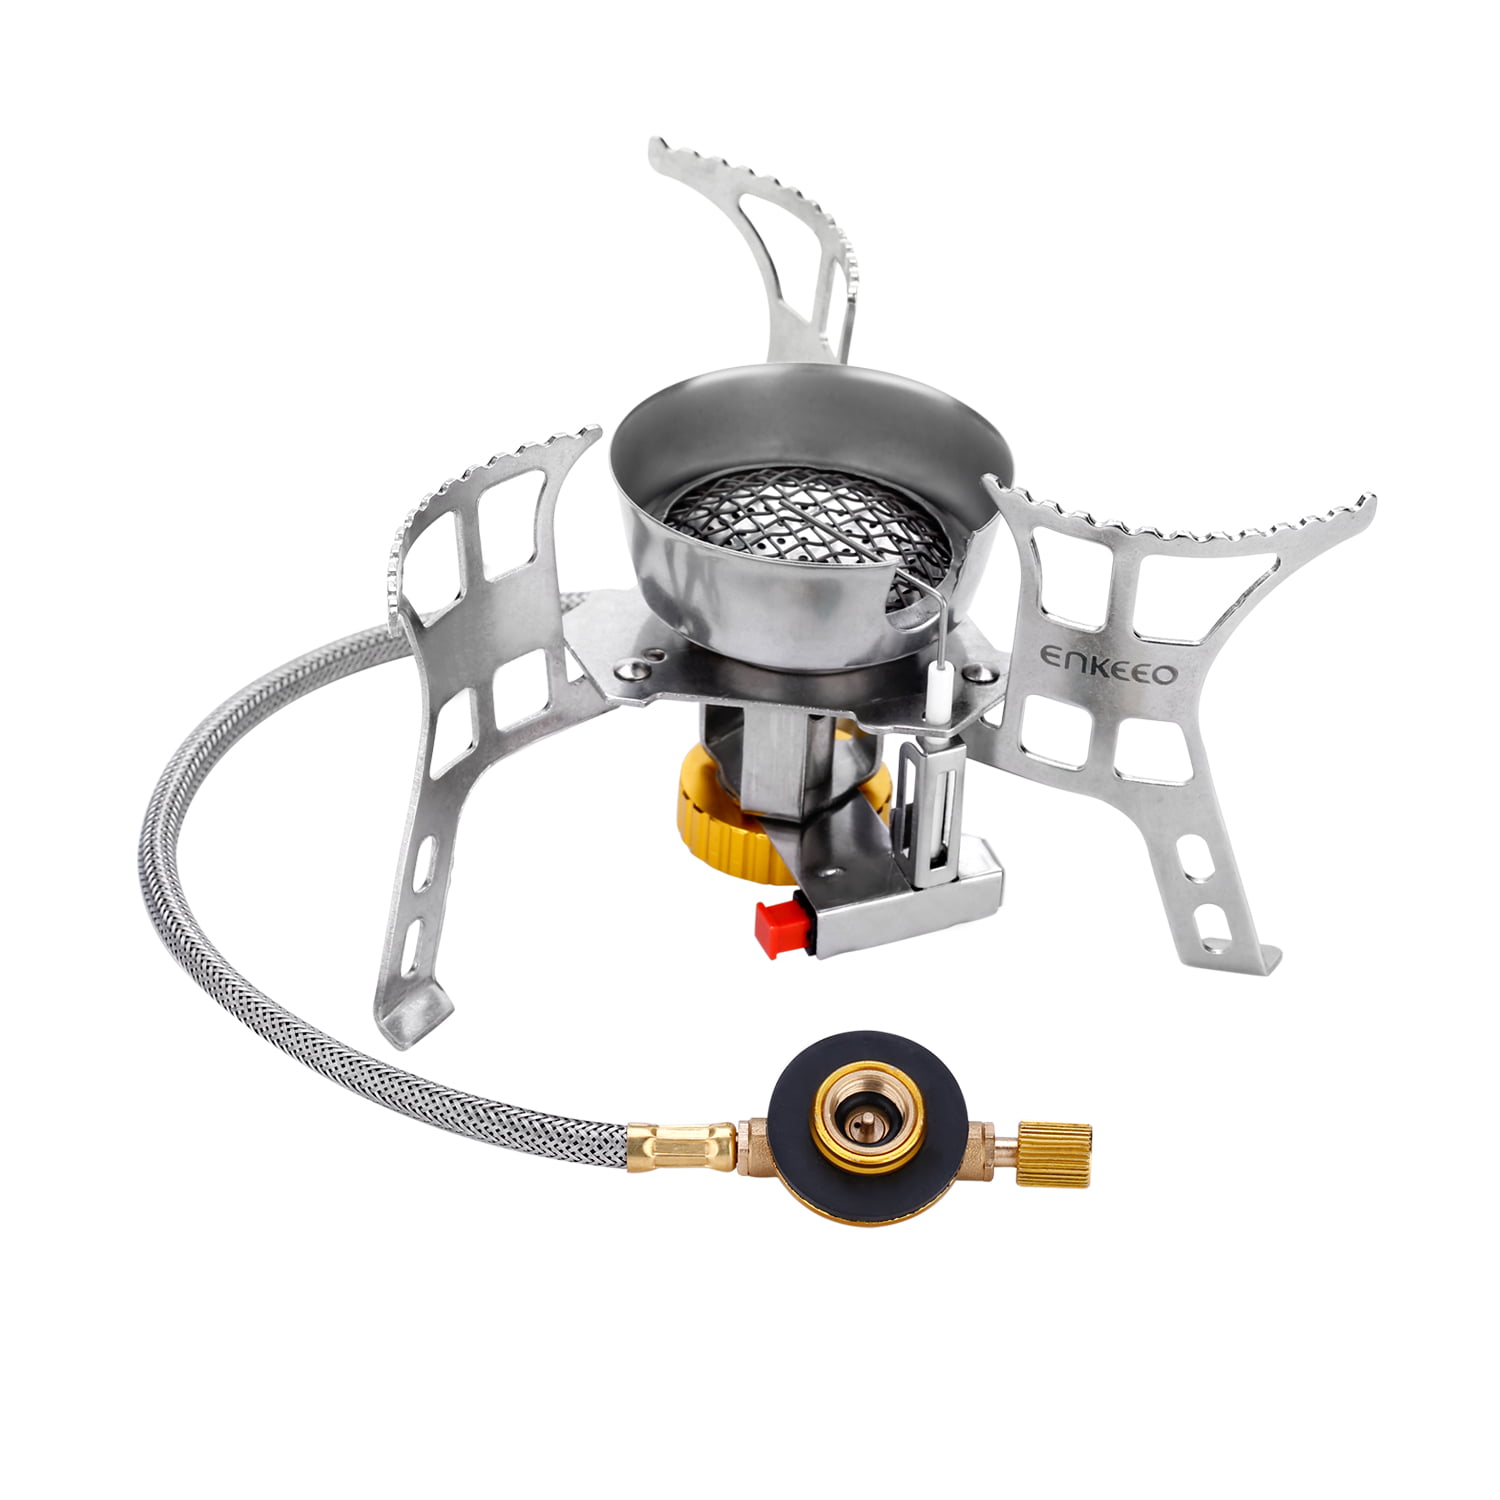 Adjustable Burner Picnic Cookware Folding Stove for Outdoor Hiking Mini Portable Camping Gas Stove with Wind shields & Heat shields【2021 Upgraded】 Backpacking Stove with Piezo Ignition Stable Support 